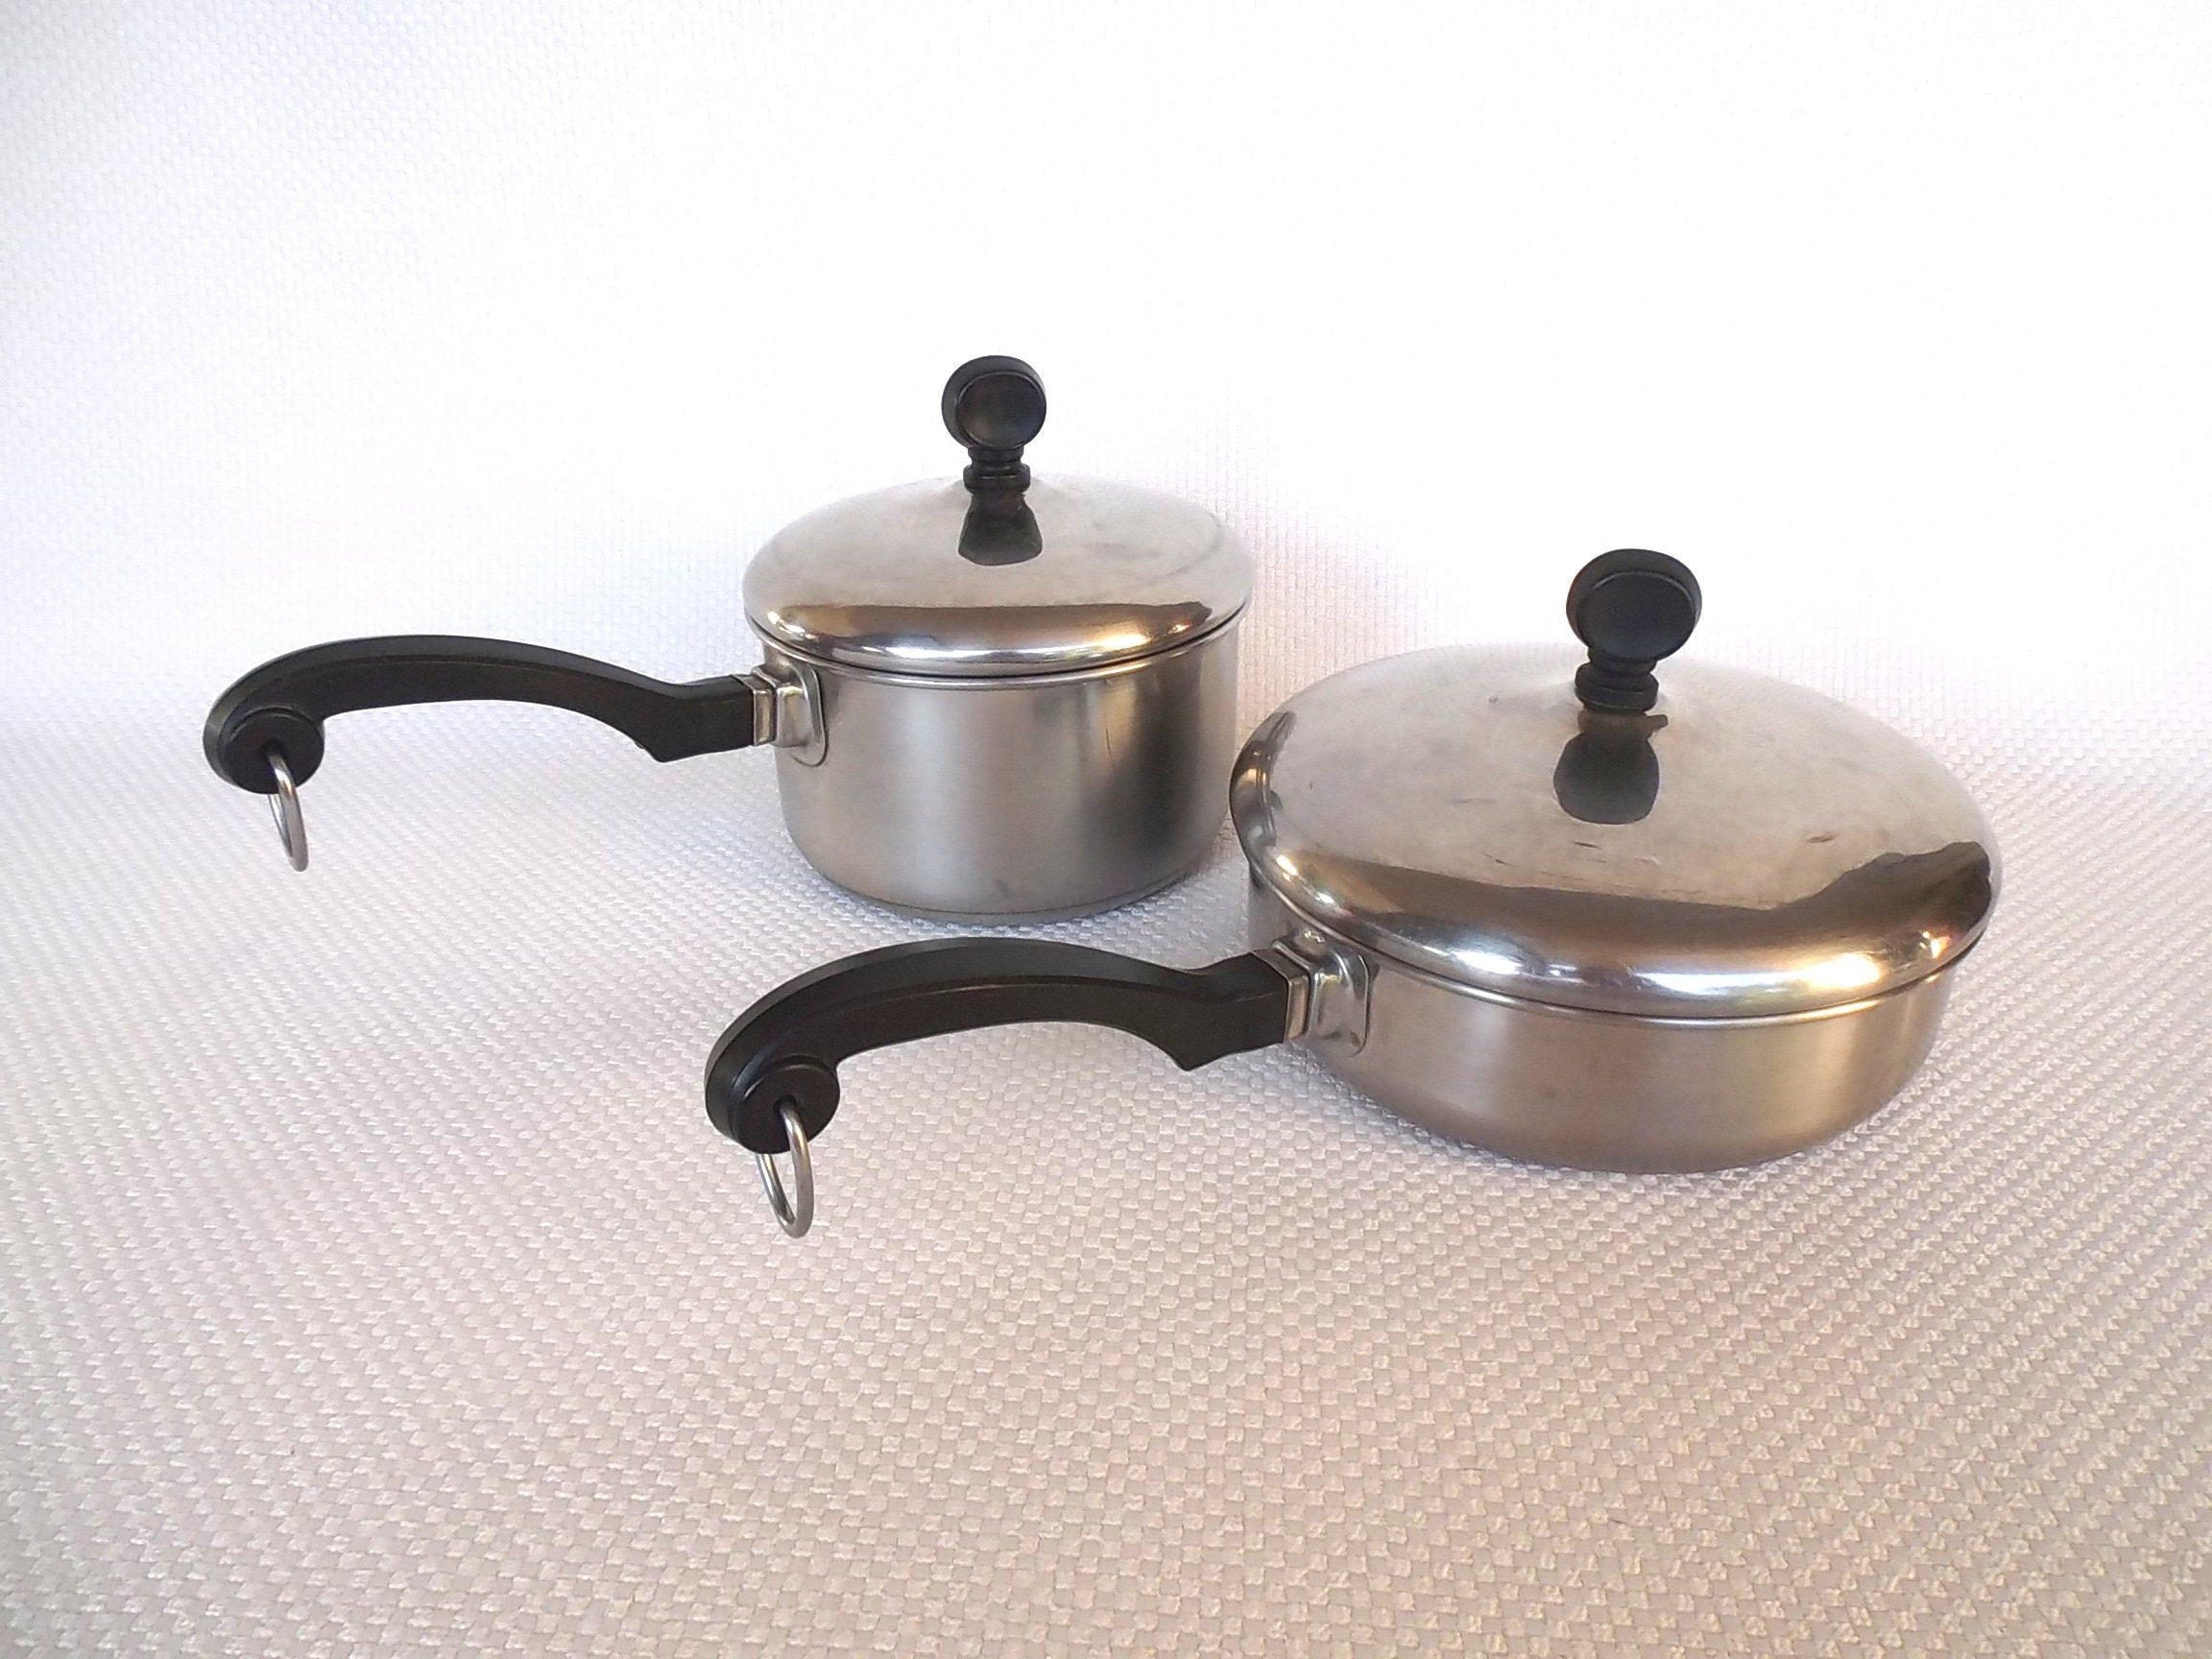 Vintage Farberware 2 qt Aluminum Clad Stainless Steel Sauce Pan Pot with  Lid